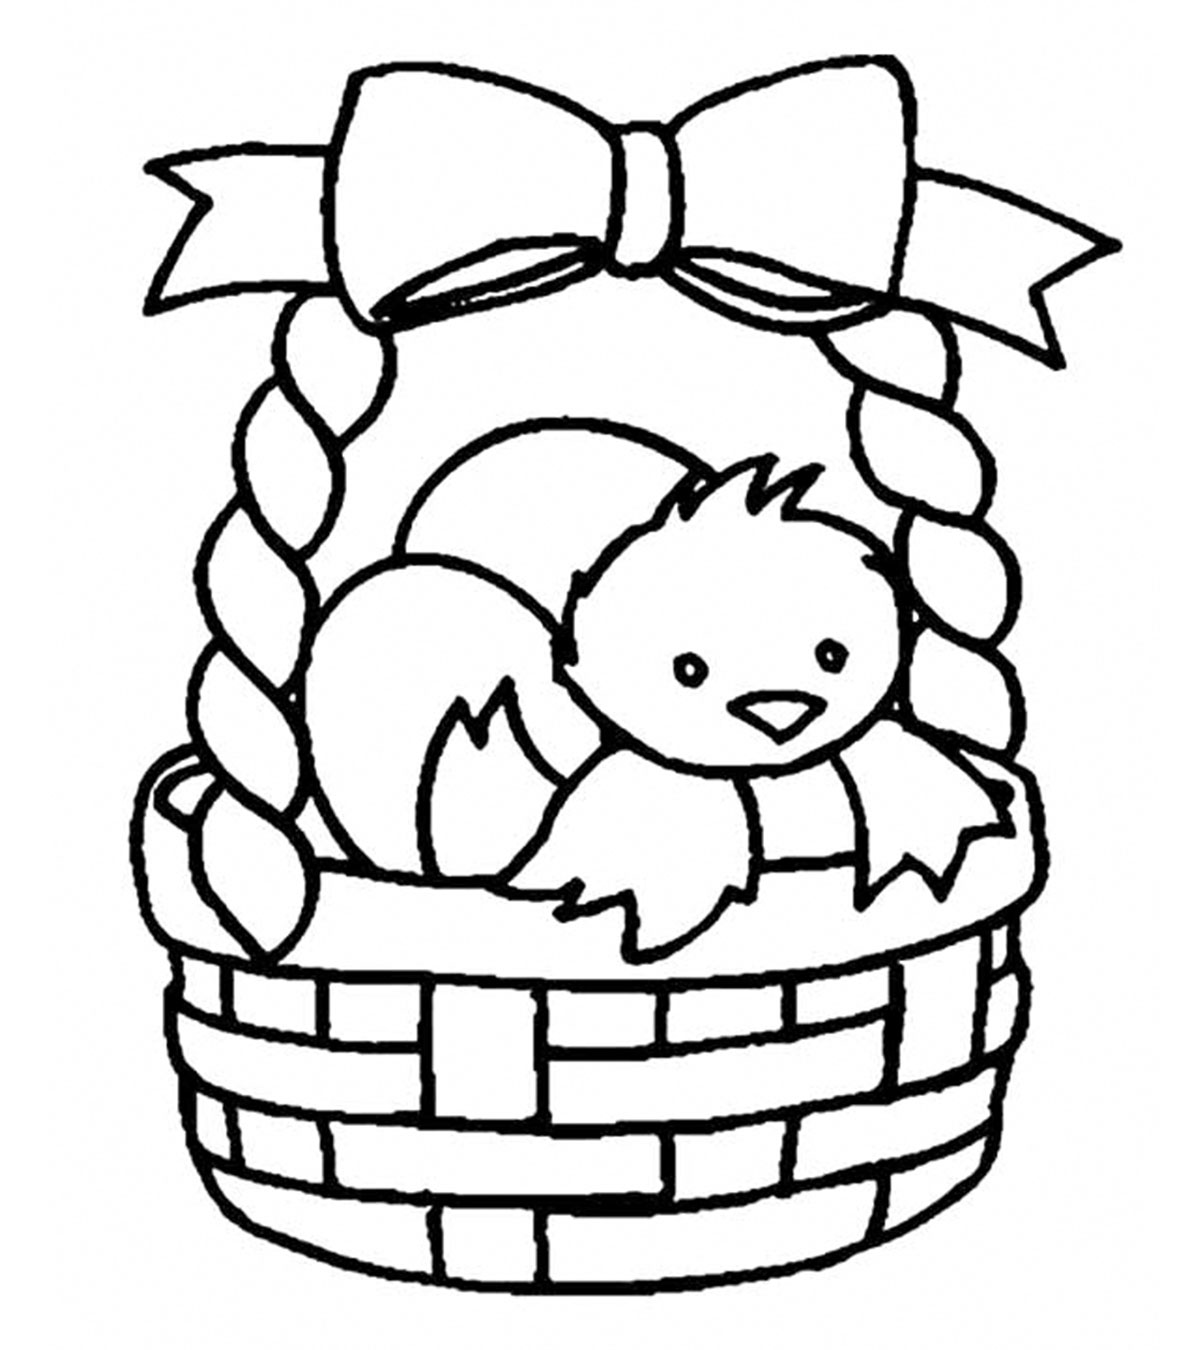 10 Cute Easter Basket Coloring Pages For Your Toddler